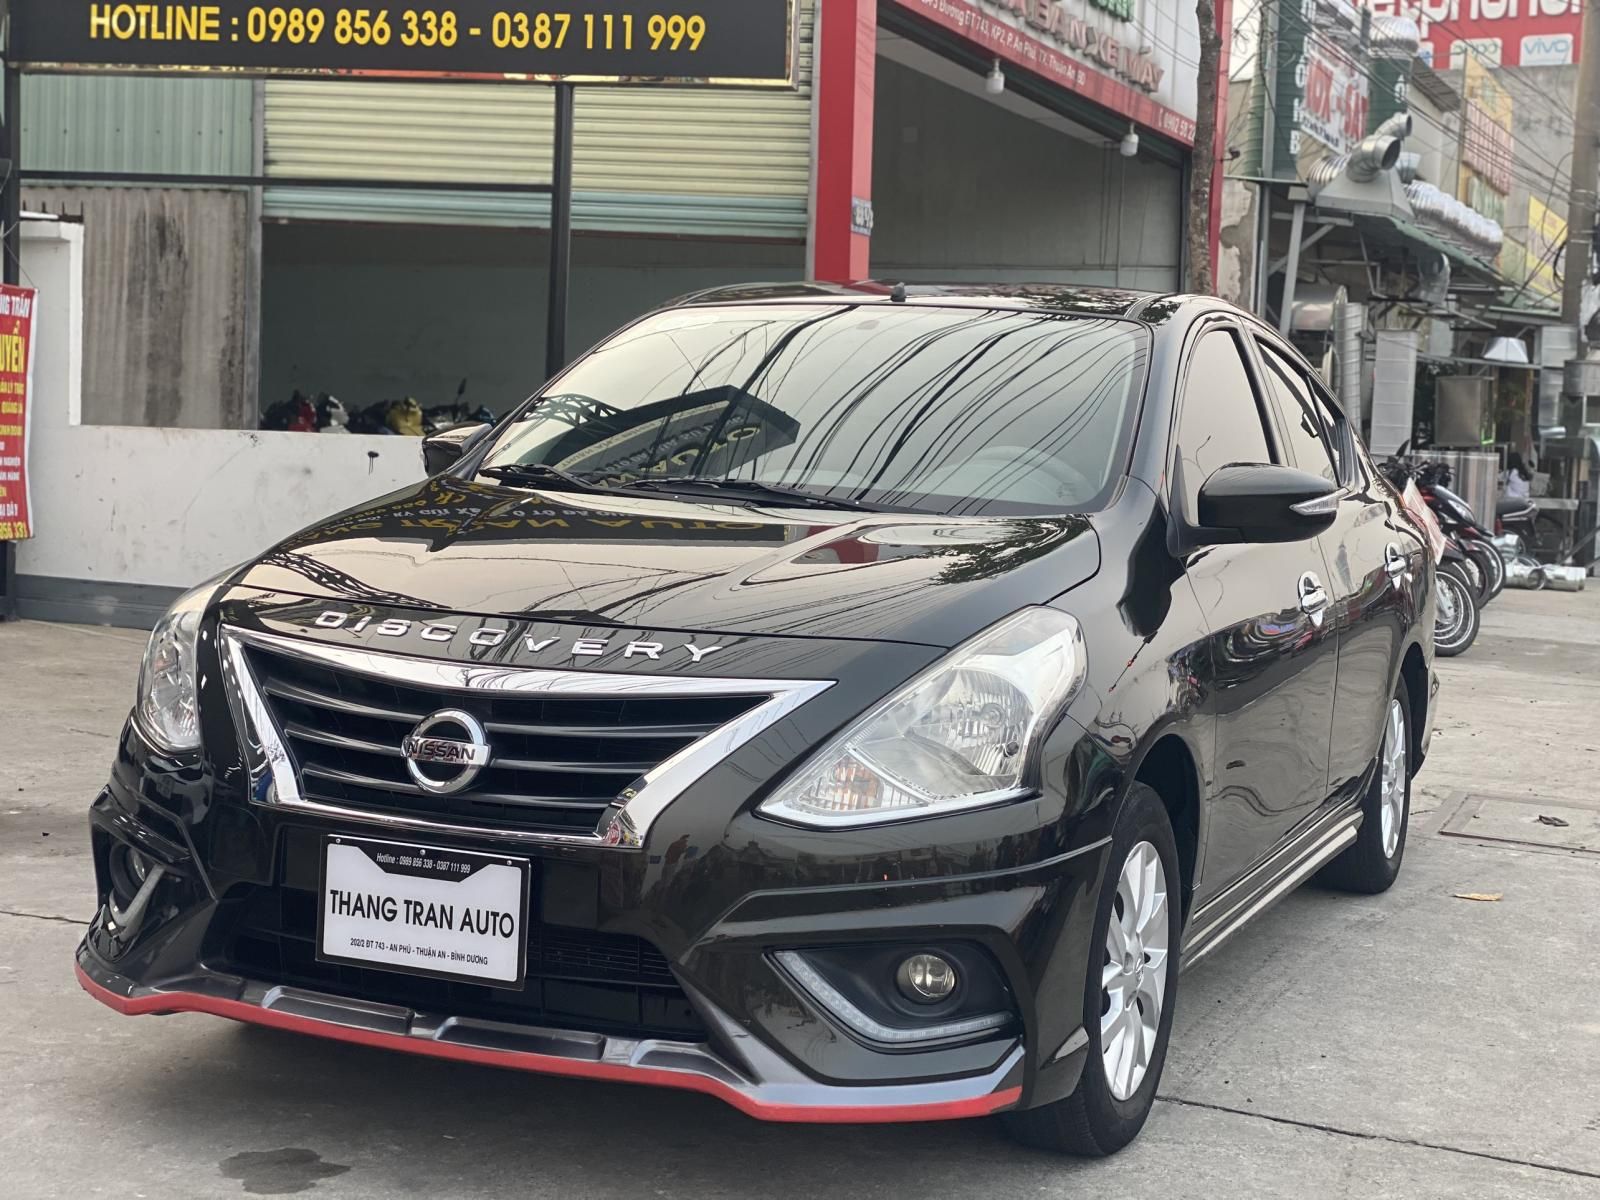 Used Nissan Sunny White 2020 For Sale in Jeddah for 34500  Shop By Motory